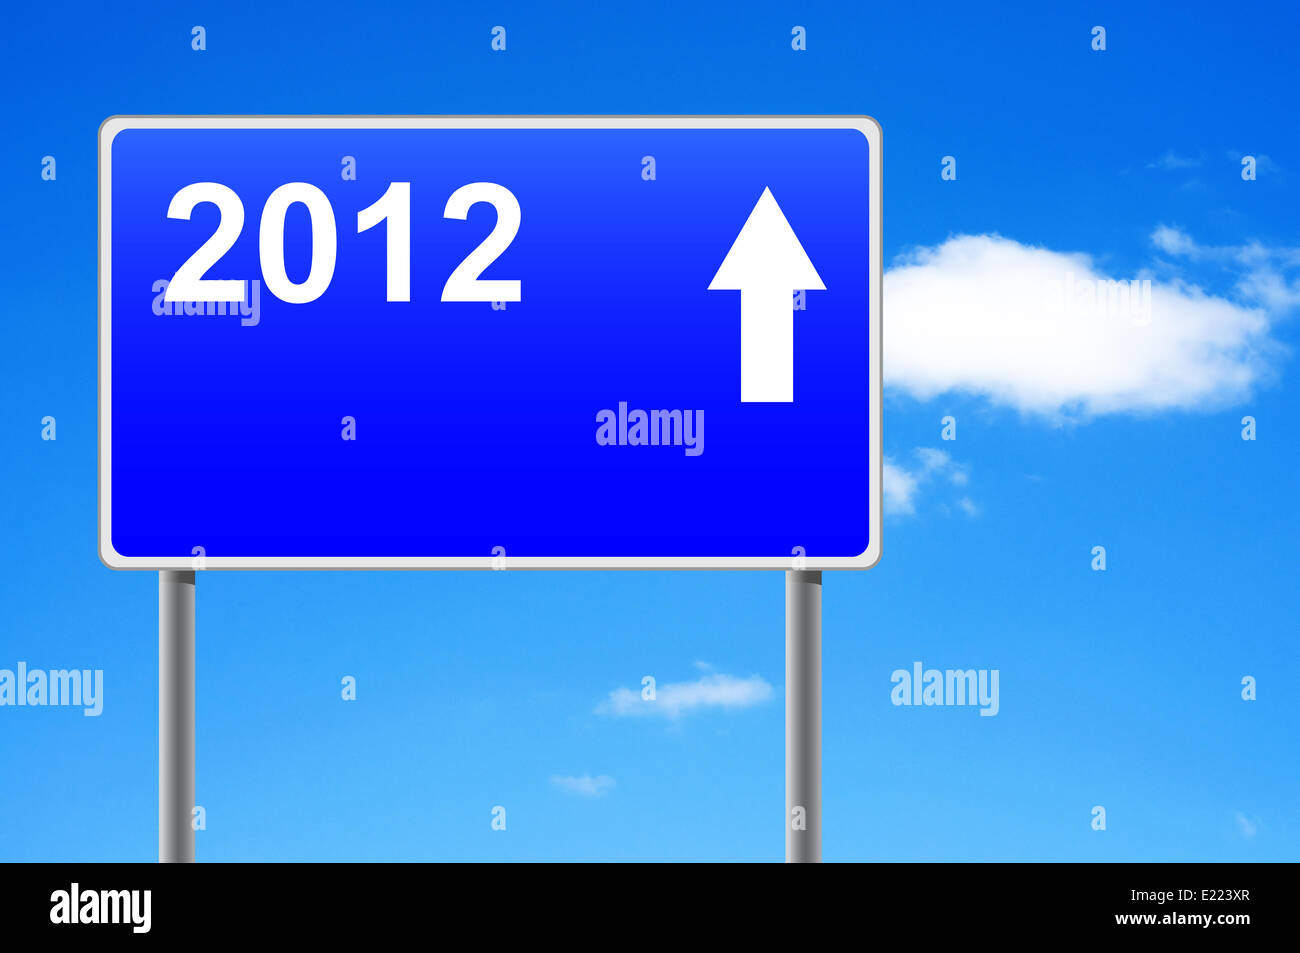 2012 arrow road sign on sky background. Stock Photo